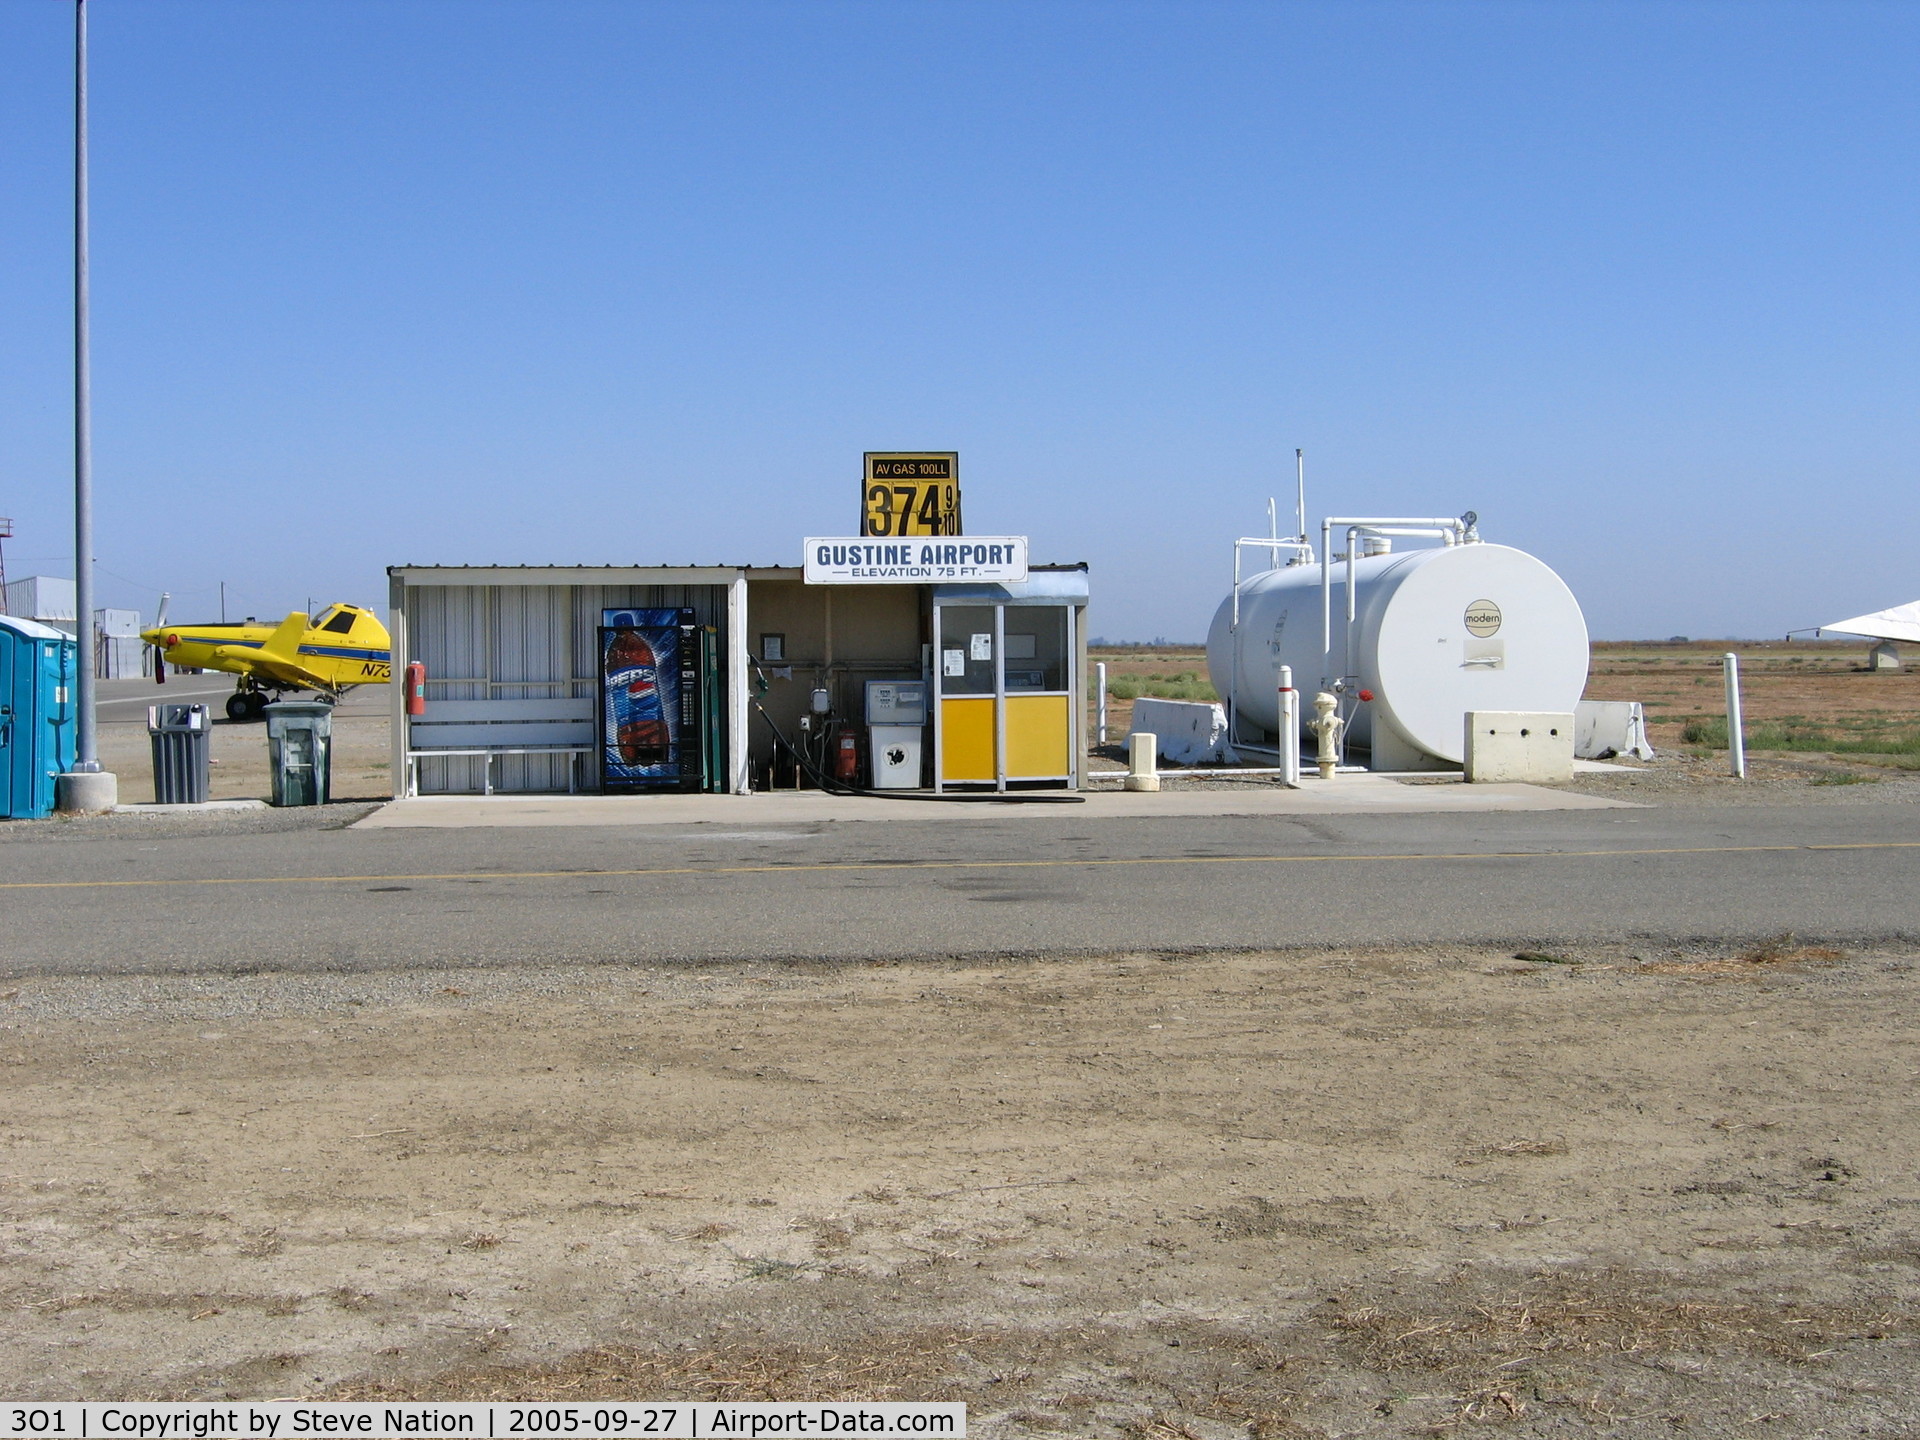 Gustine Airport (3O1) - Now up to $3.74 a gallon